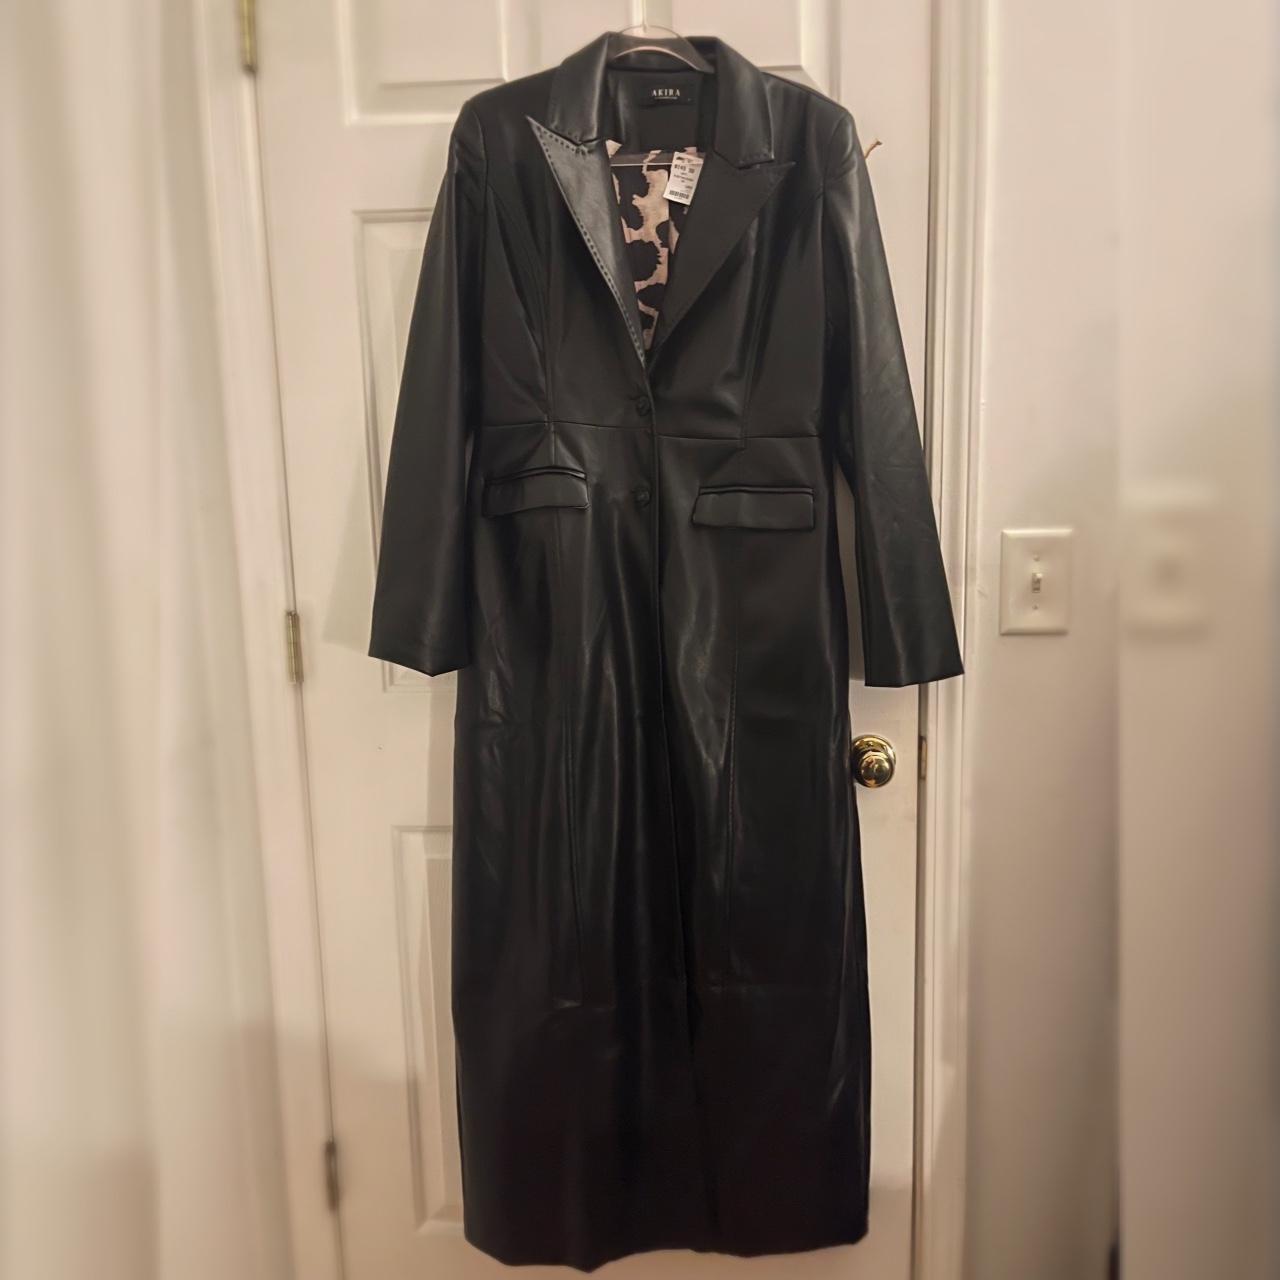 Brand new Leather trench coat with leopard printed... - Depop